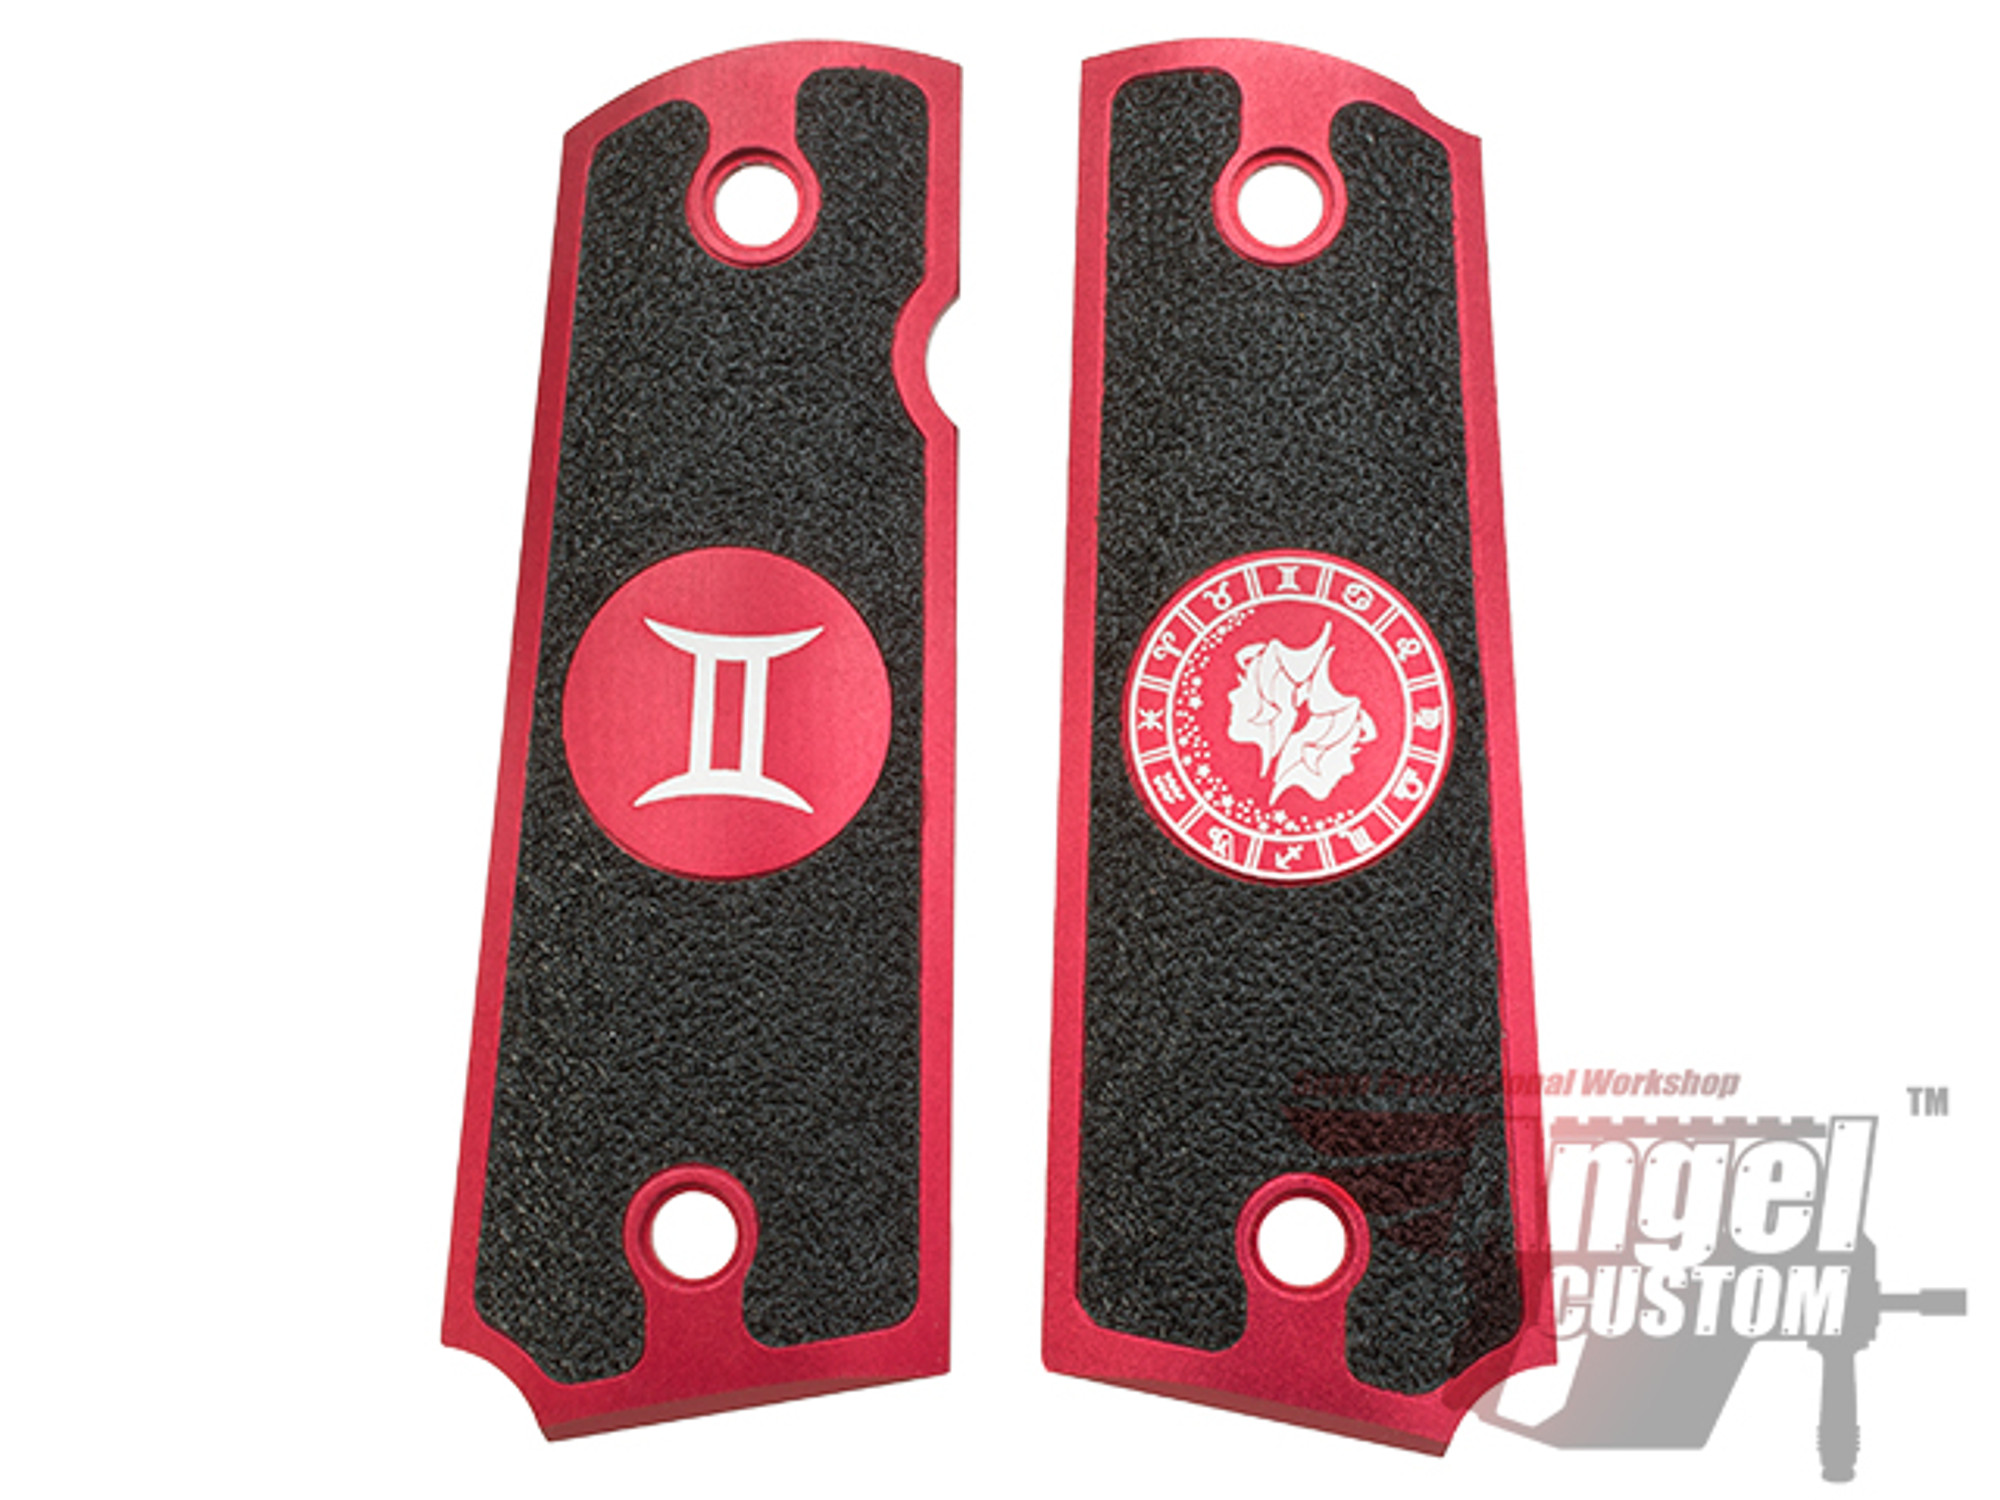 Angel Custom CNC Machined Tac-Glove "Zodiac" Grips for WE-Tech 1911 Series Airsoft Pistols - Red (Sign: Gemini)